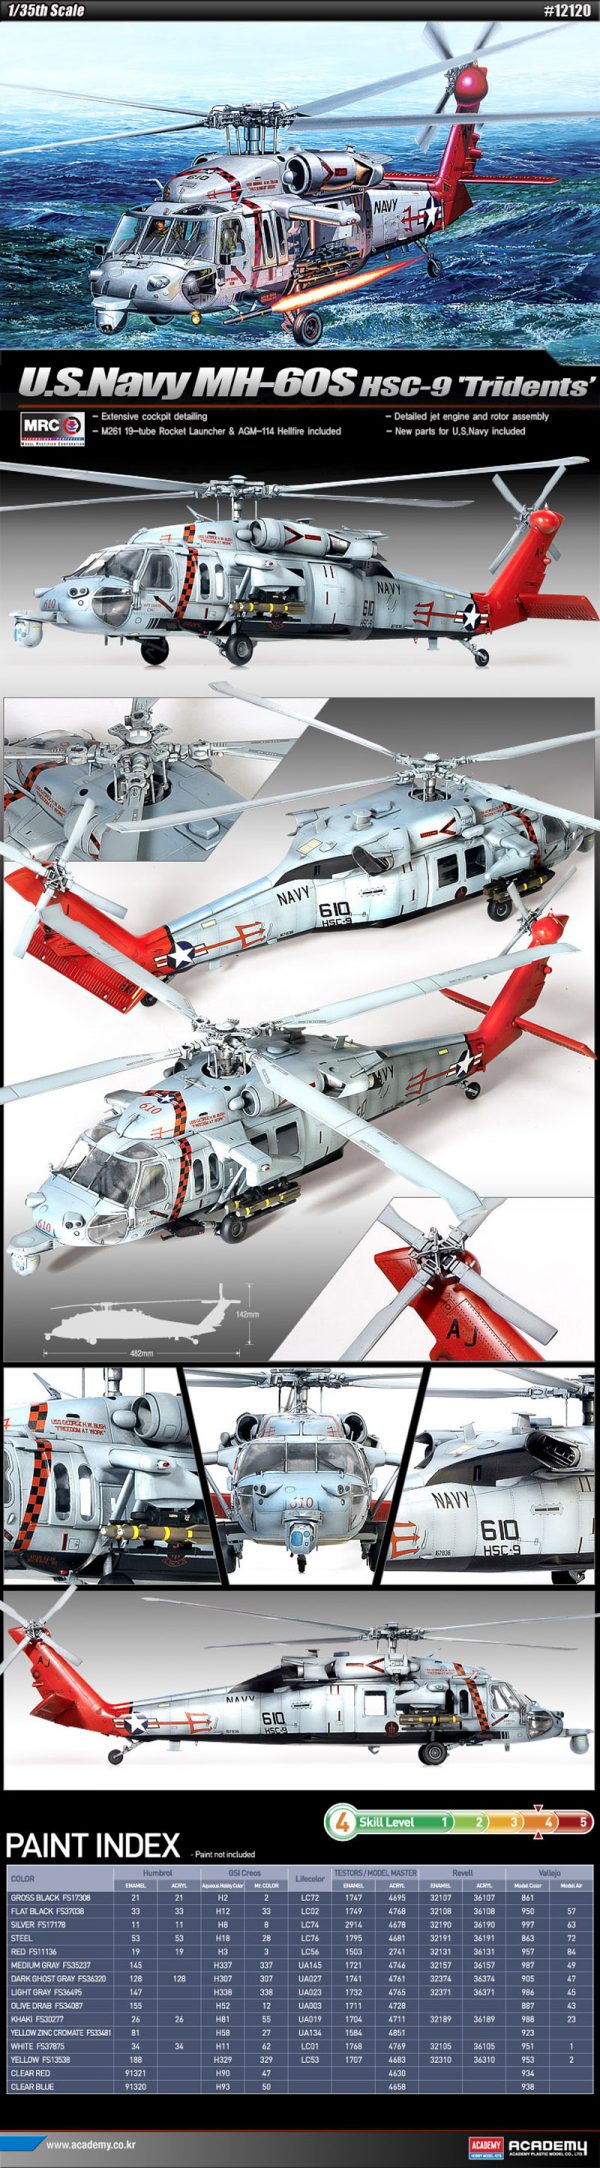 US Navy MH-60S HSC-9 "Tridents" Helicopter - 12120